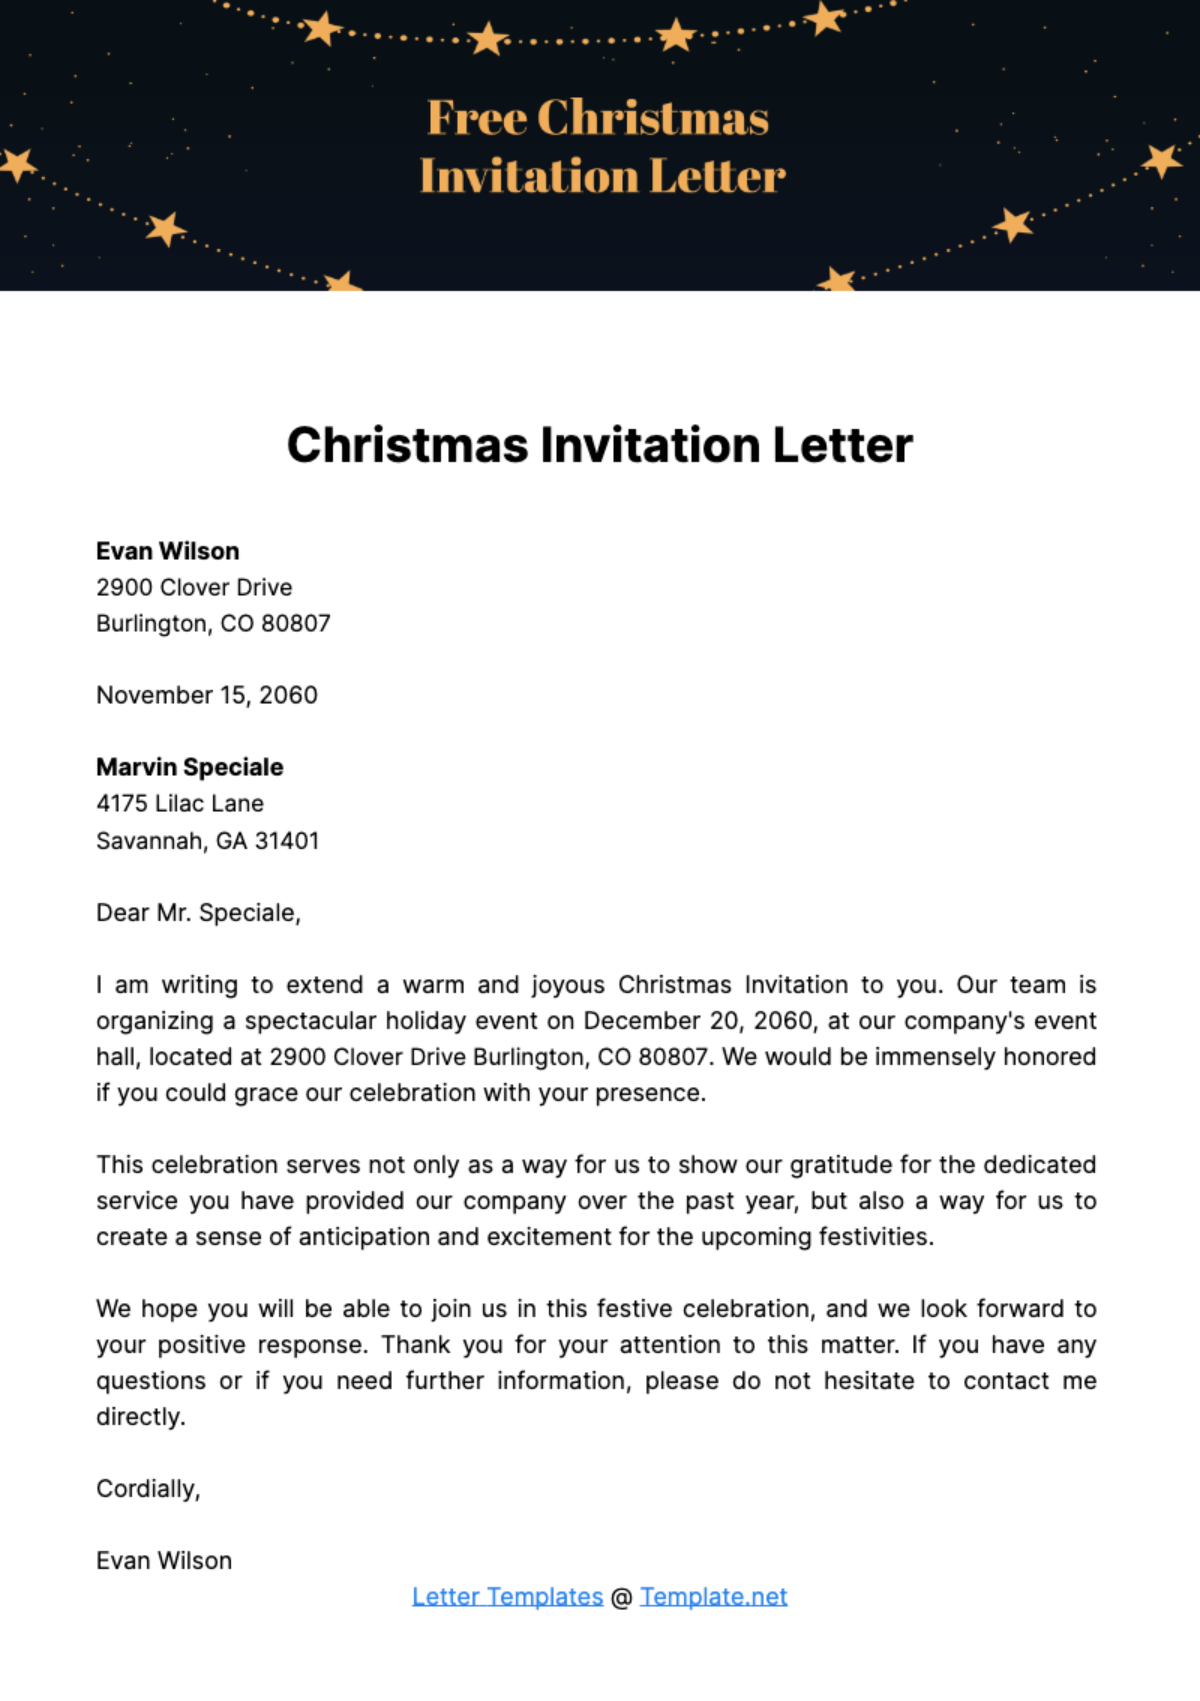 Free Christmas Invitation Letter Template